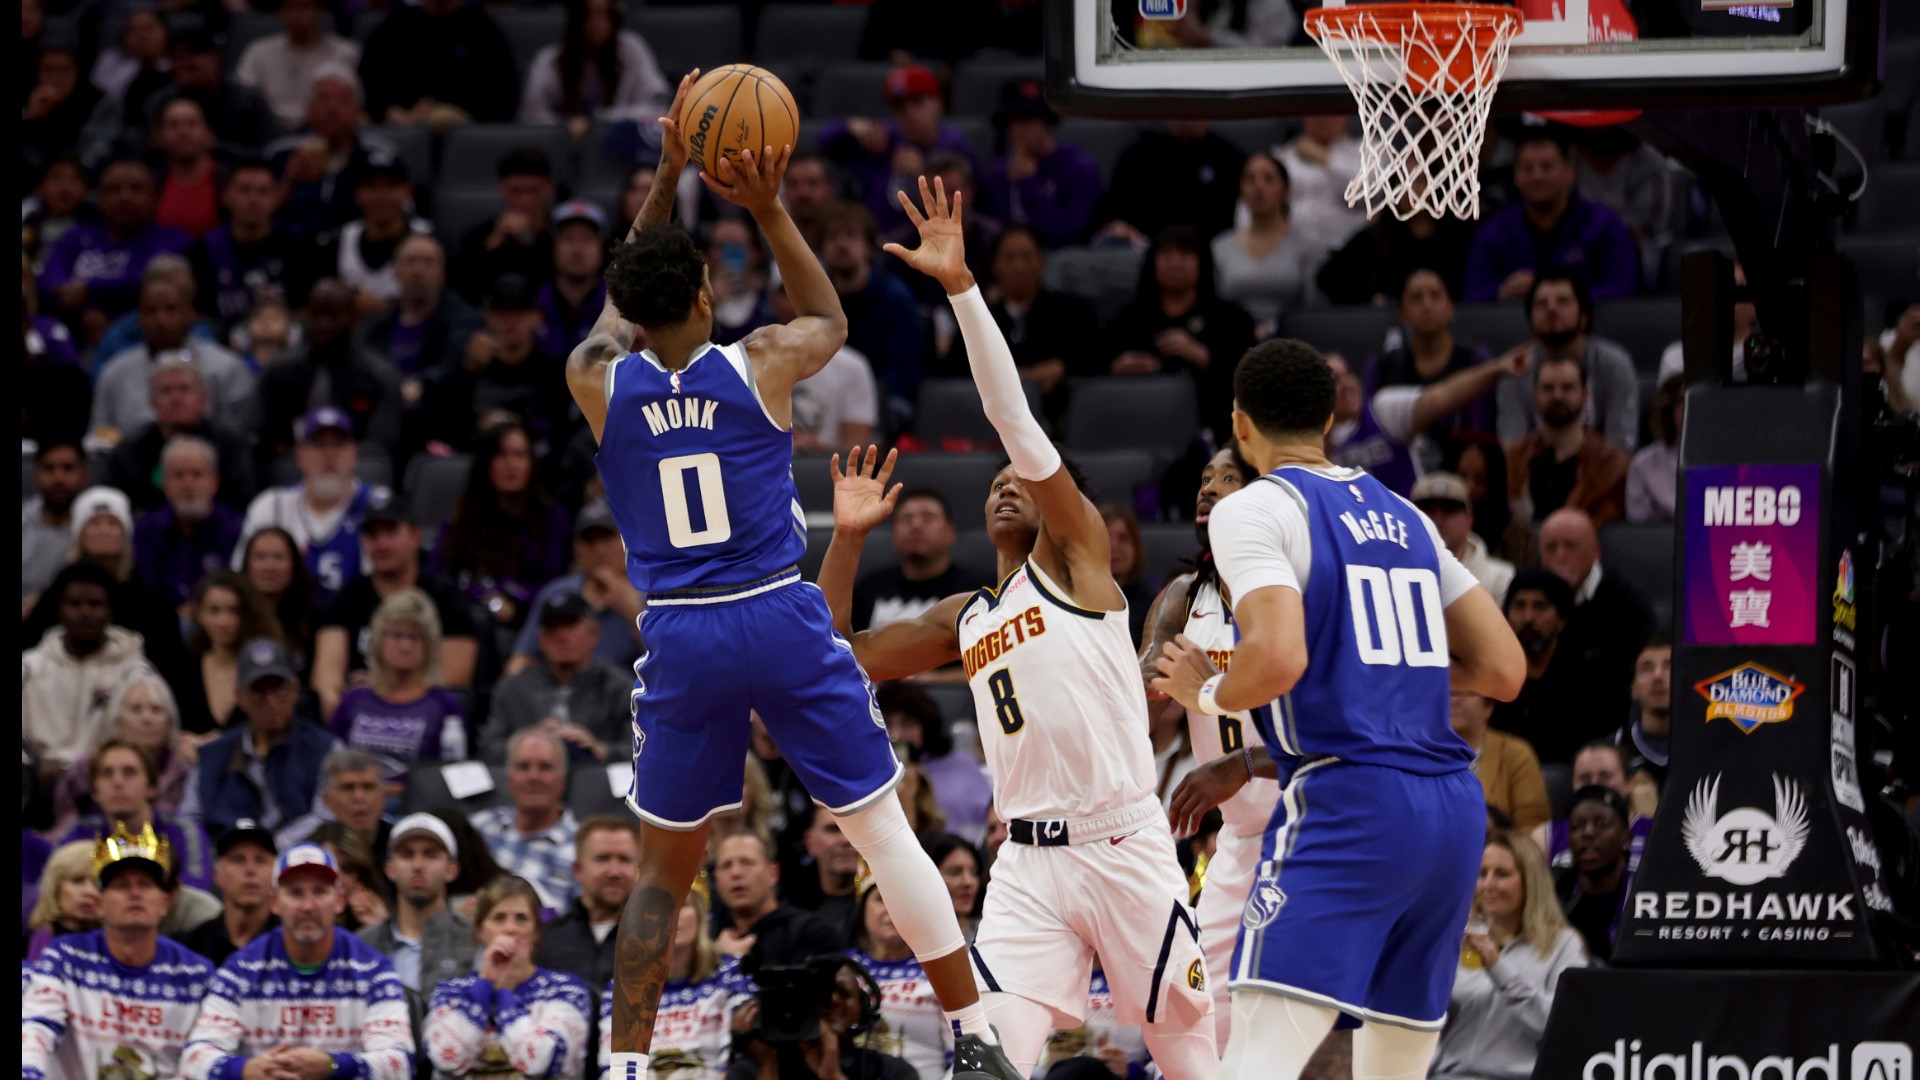 The Kings led comfortably most of the might before Denver made its best run to get within 112-110 on Jokic's only 3-pointer of the game with 4 minutes left.